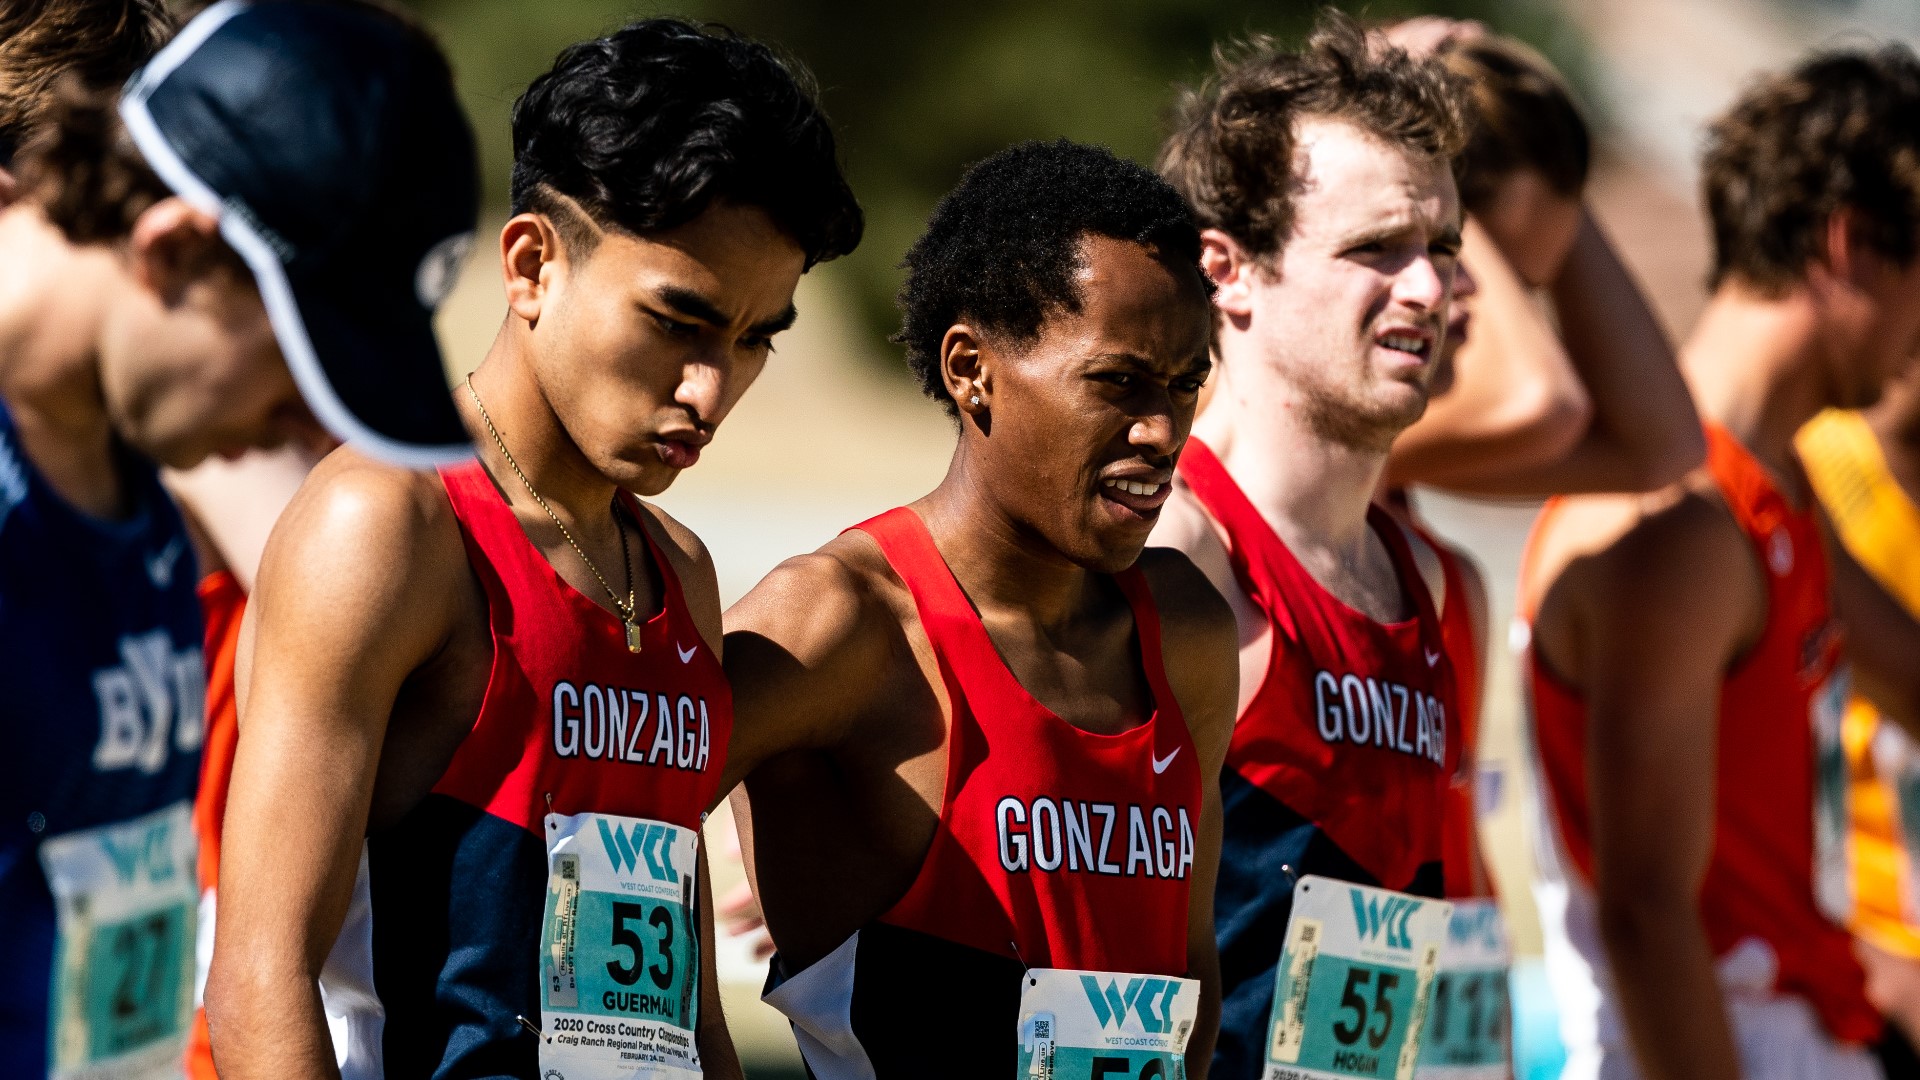 The Zags placed second at the WCC Championships after not racing for 467 days. Their effort after the adversity has put them in position for a chance at nationals.